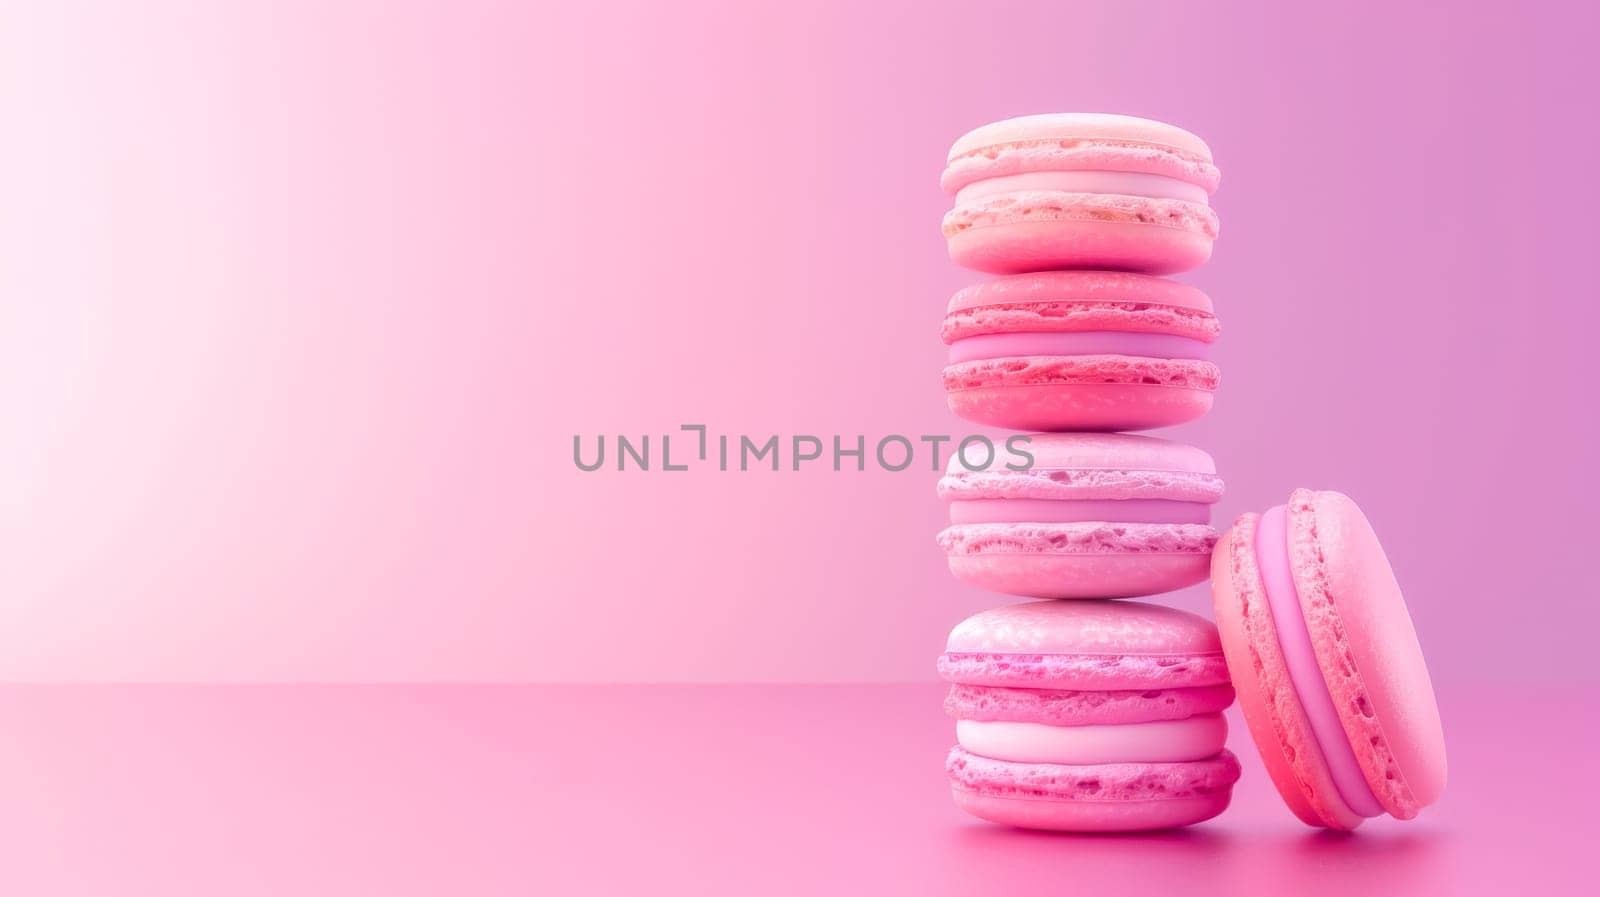 Tower of delicate pink macarons arranged on a soft pink to purple gradient background